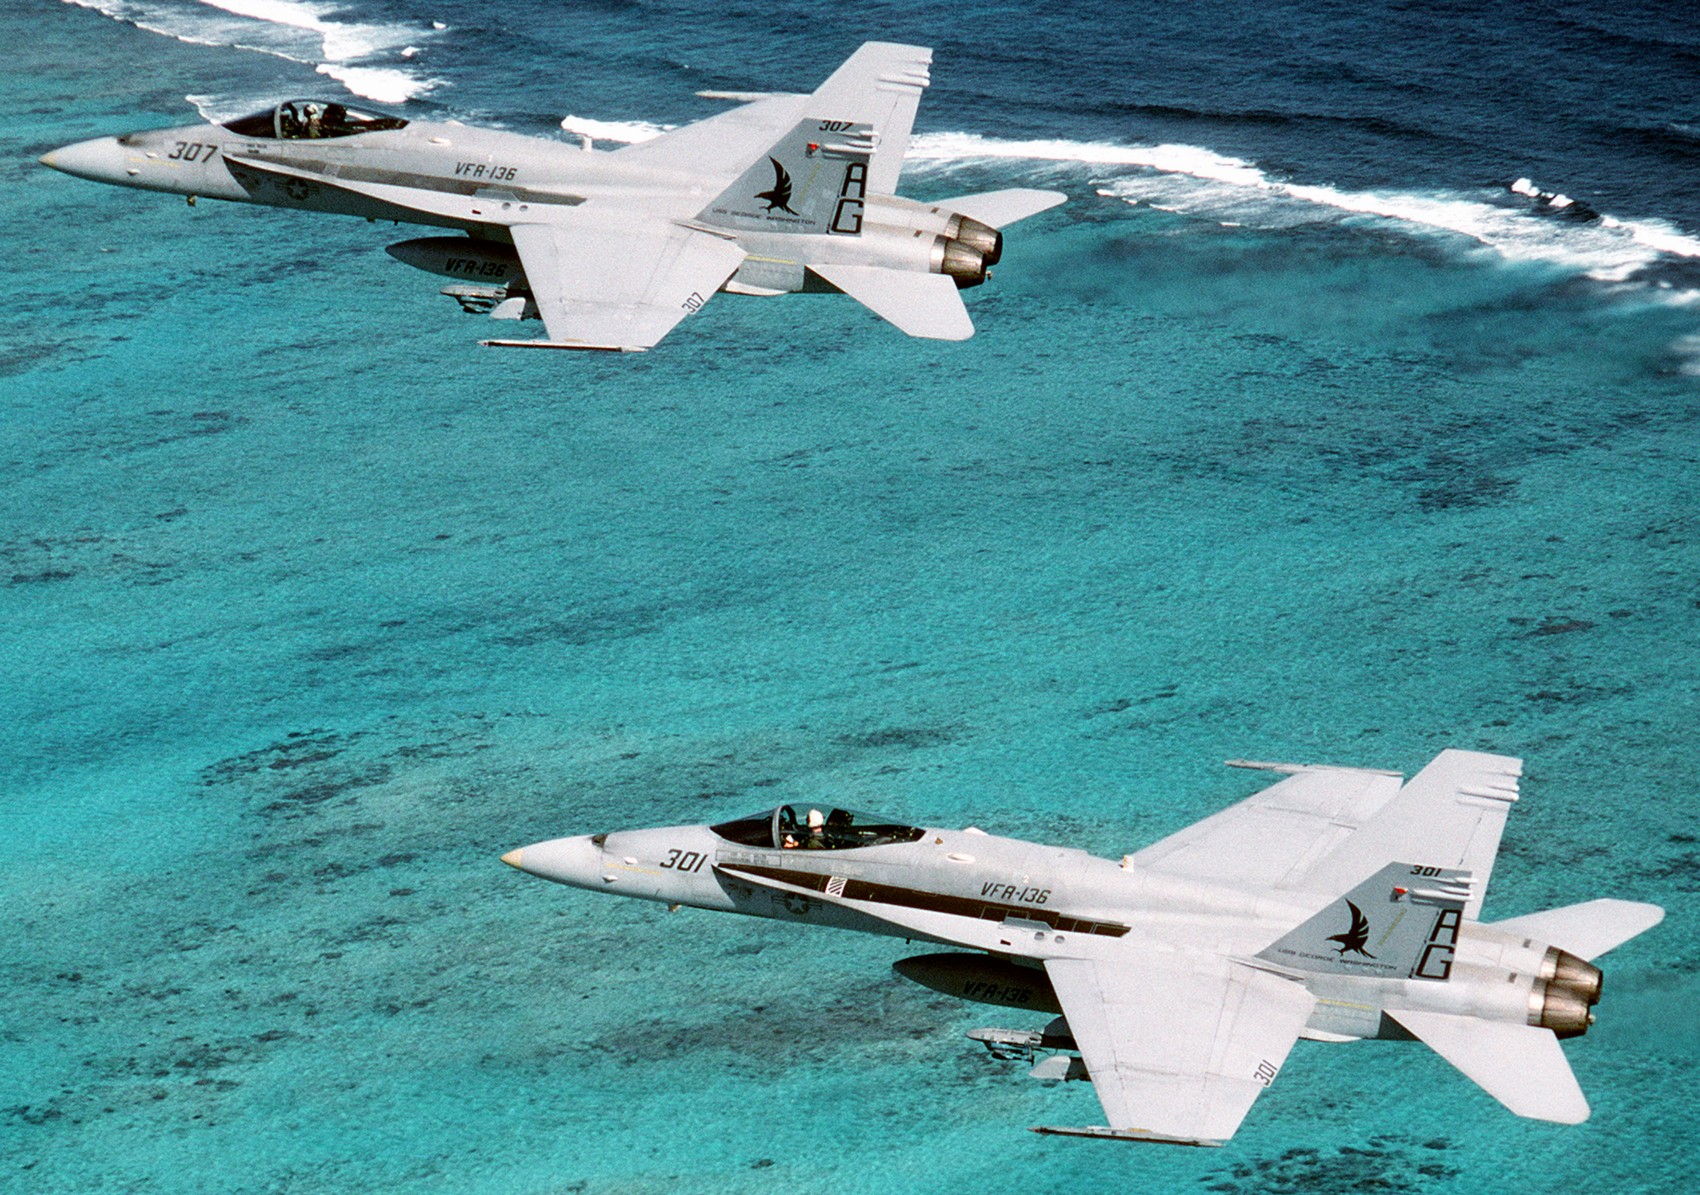 vfa-136 knighthawks strike fighter squadron f/a-18c hornet 1992 77 cvw-7 naval station roosevelt roads puerto rico